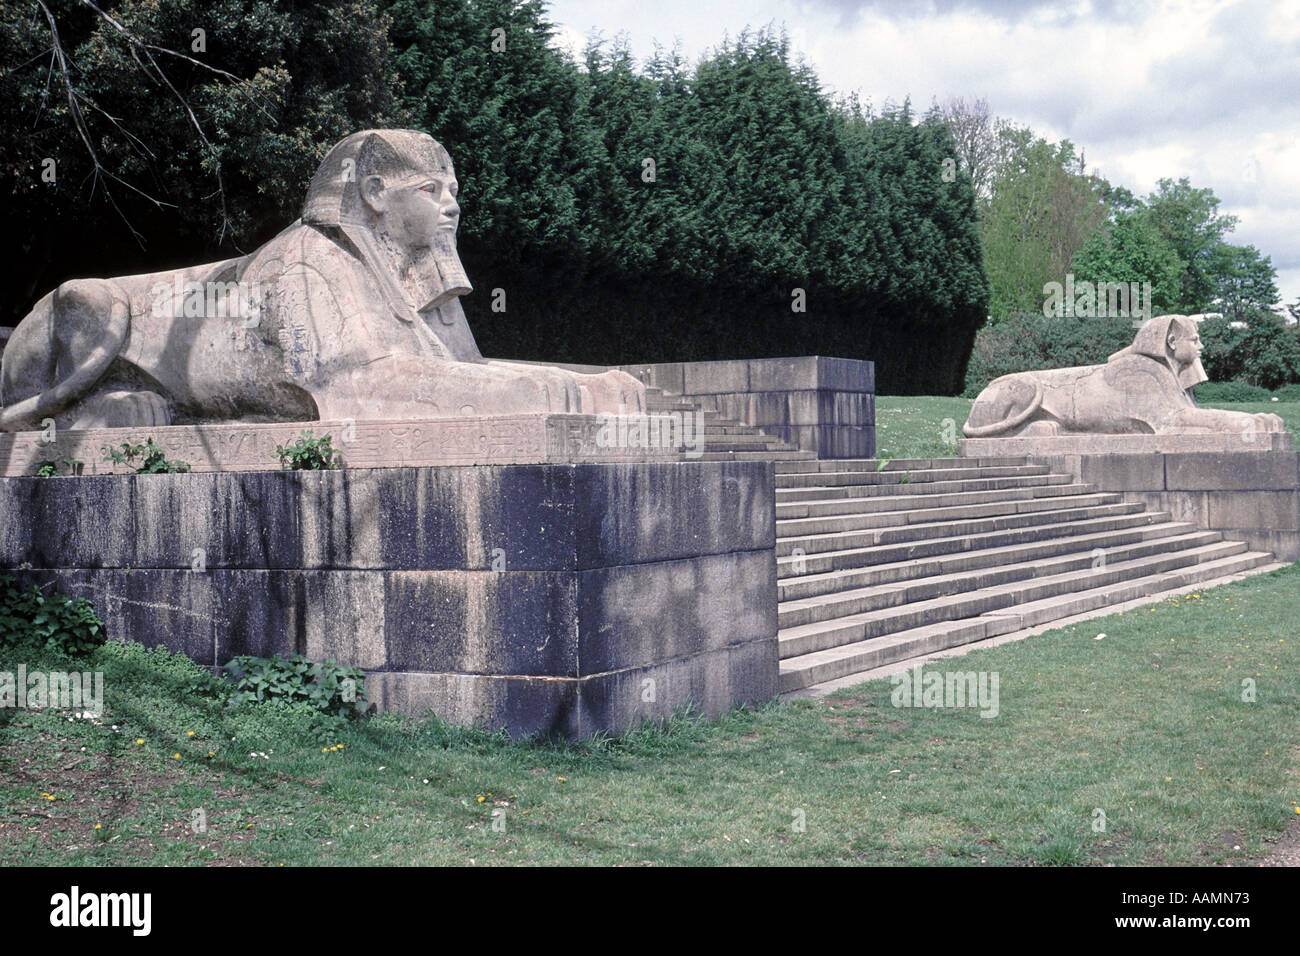 Two of the stone sphinxes that once guarded the steps leading up to the Crystal Palace in south London. Stock Photo